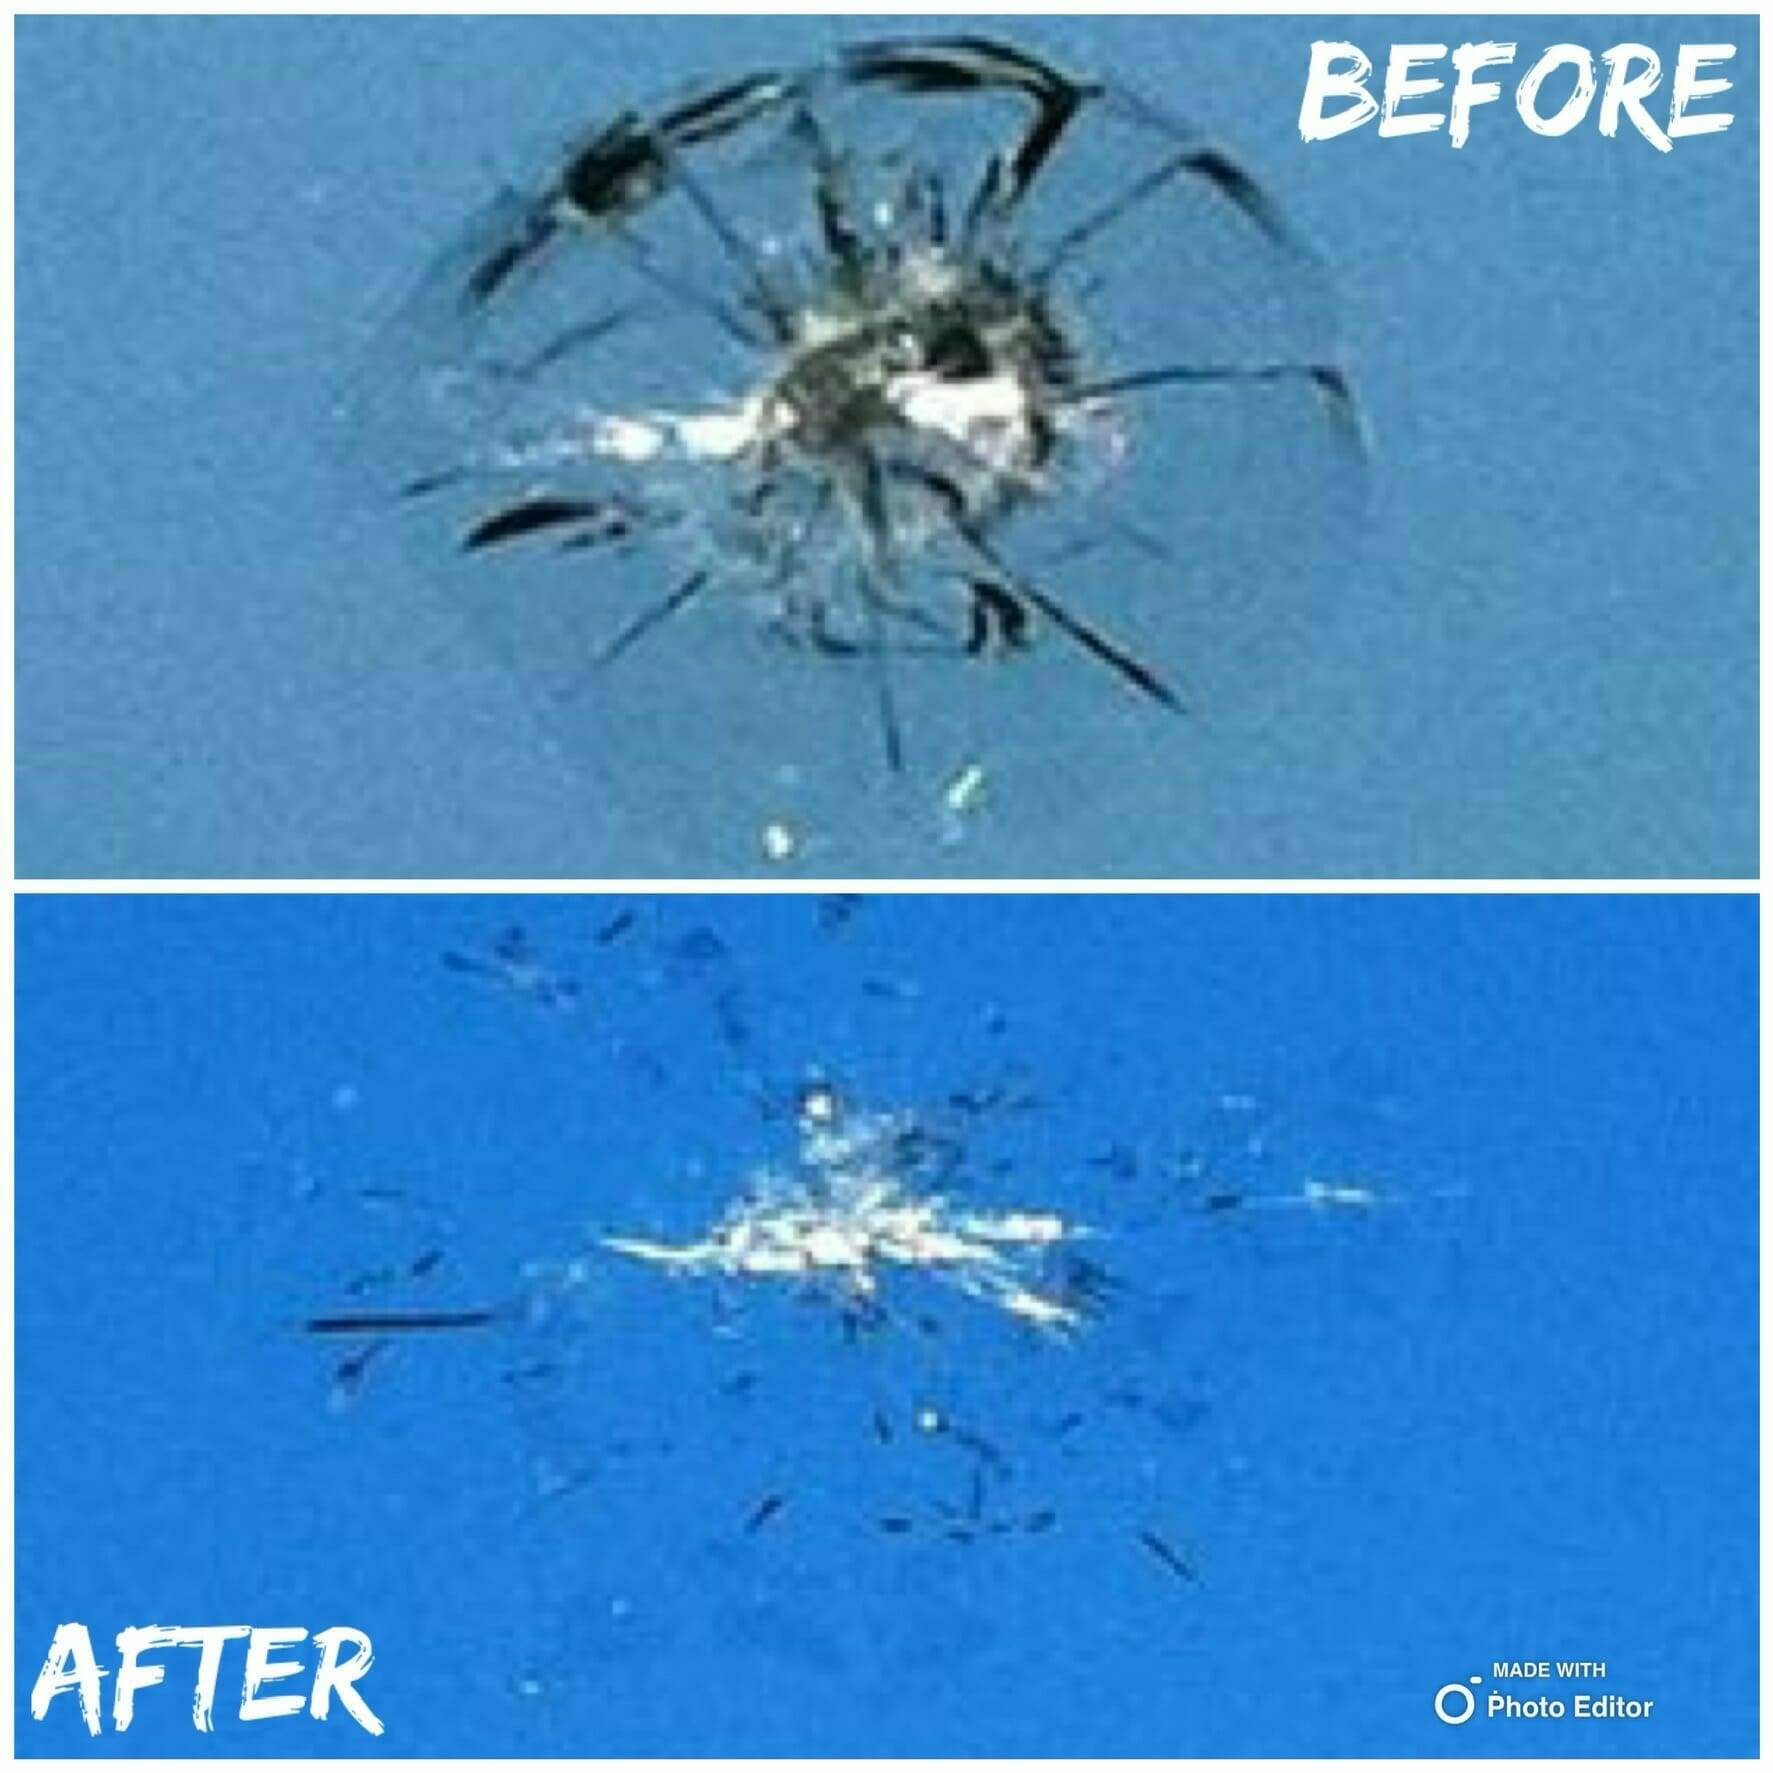 This composite image showcases the windshield repair work on an 09 Honda Accord Coupe in McAllister Park, San Antonio, Texas. The upper image displays the windshield's initial state with a noticeable rock chip. In contrast, the lower image highlights the outcome of the repair process, where the previously visible damage has been meticulously repaired and is no longer apparent, illustrating our dedication to high-quality windshield repair services.